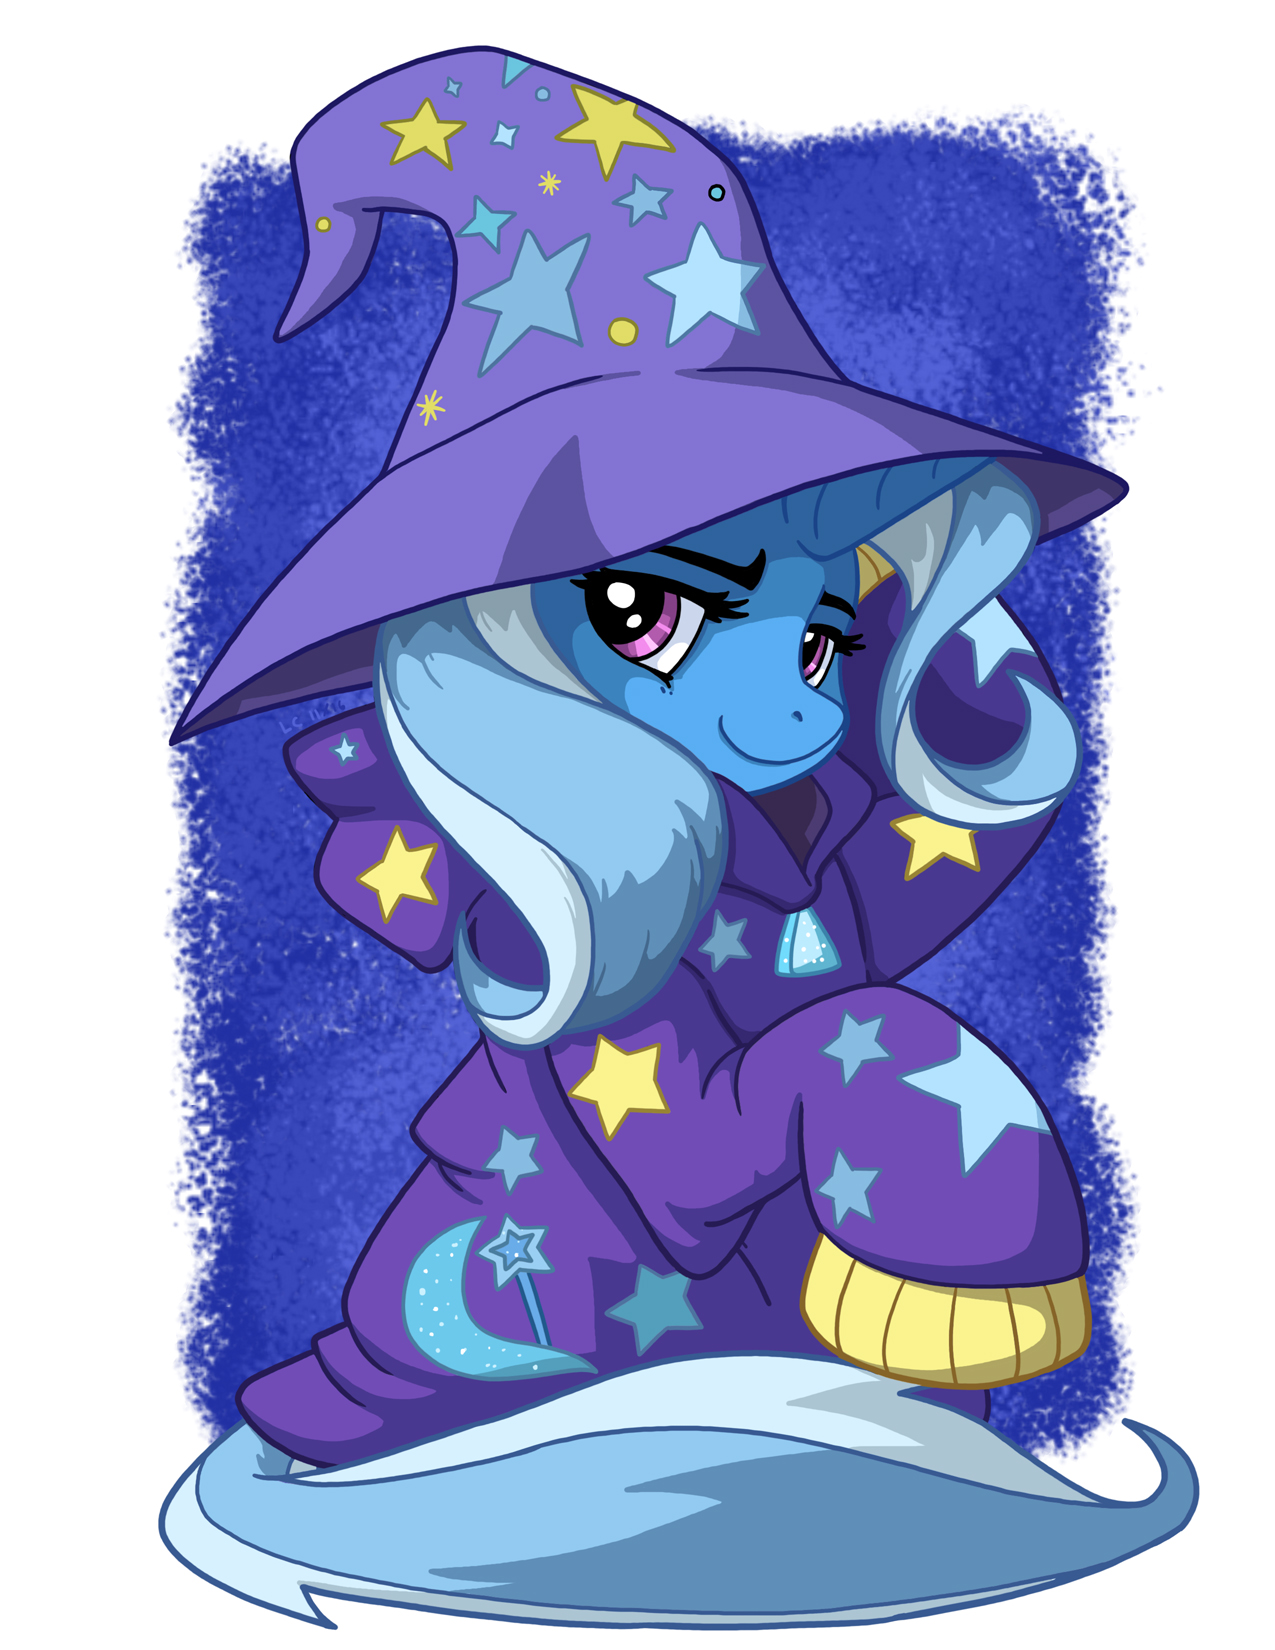 trixie_in_over_sized_sweater_by_latecust